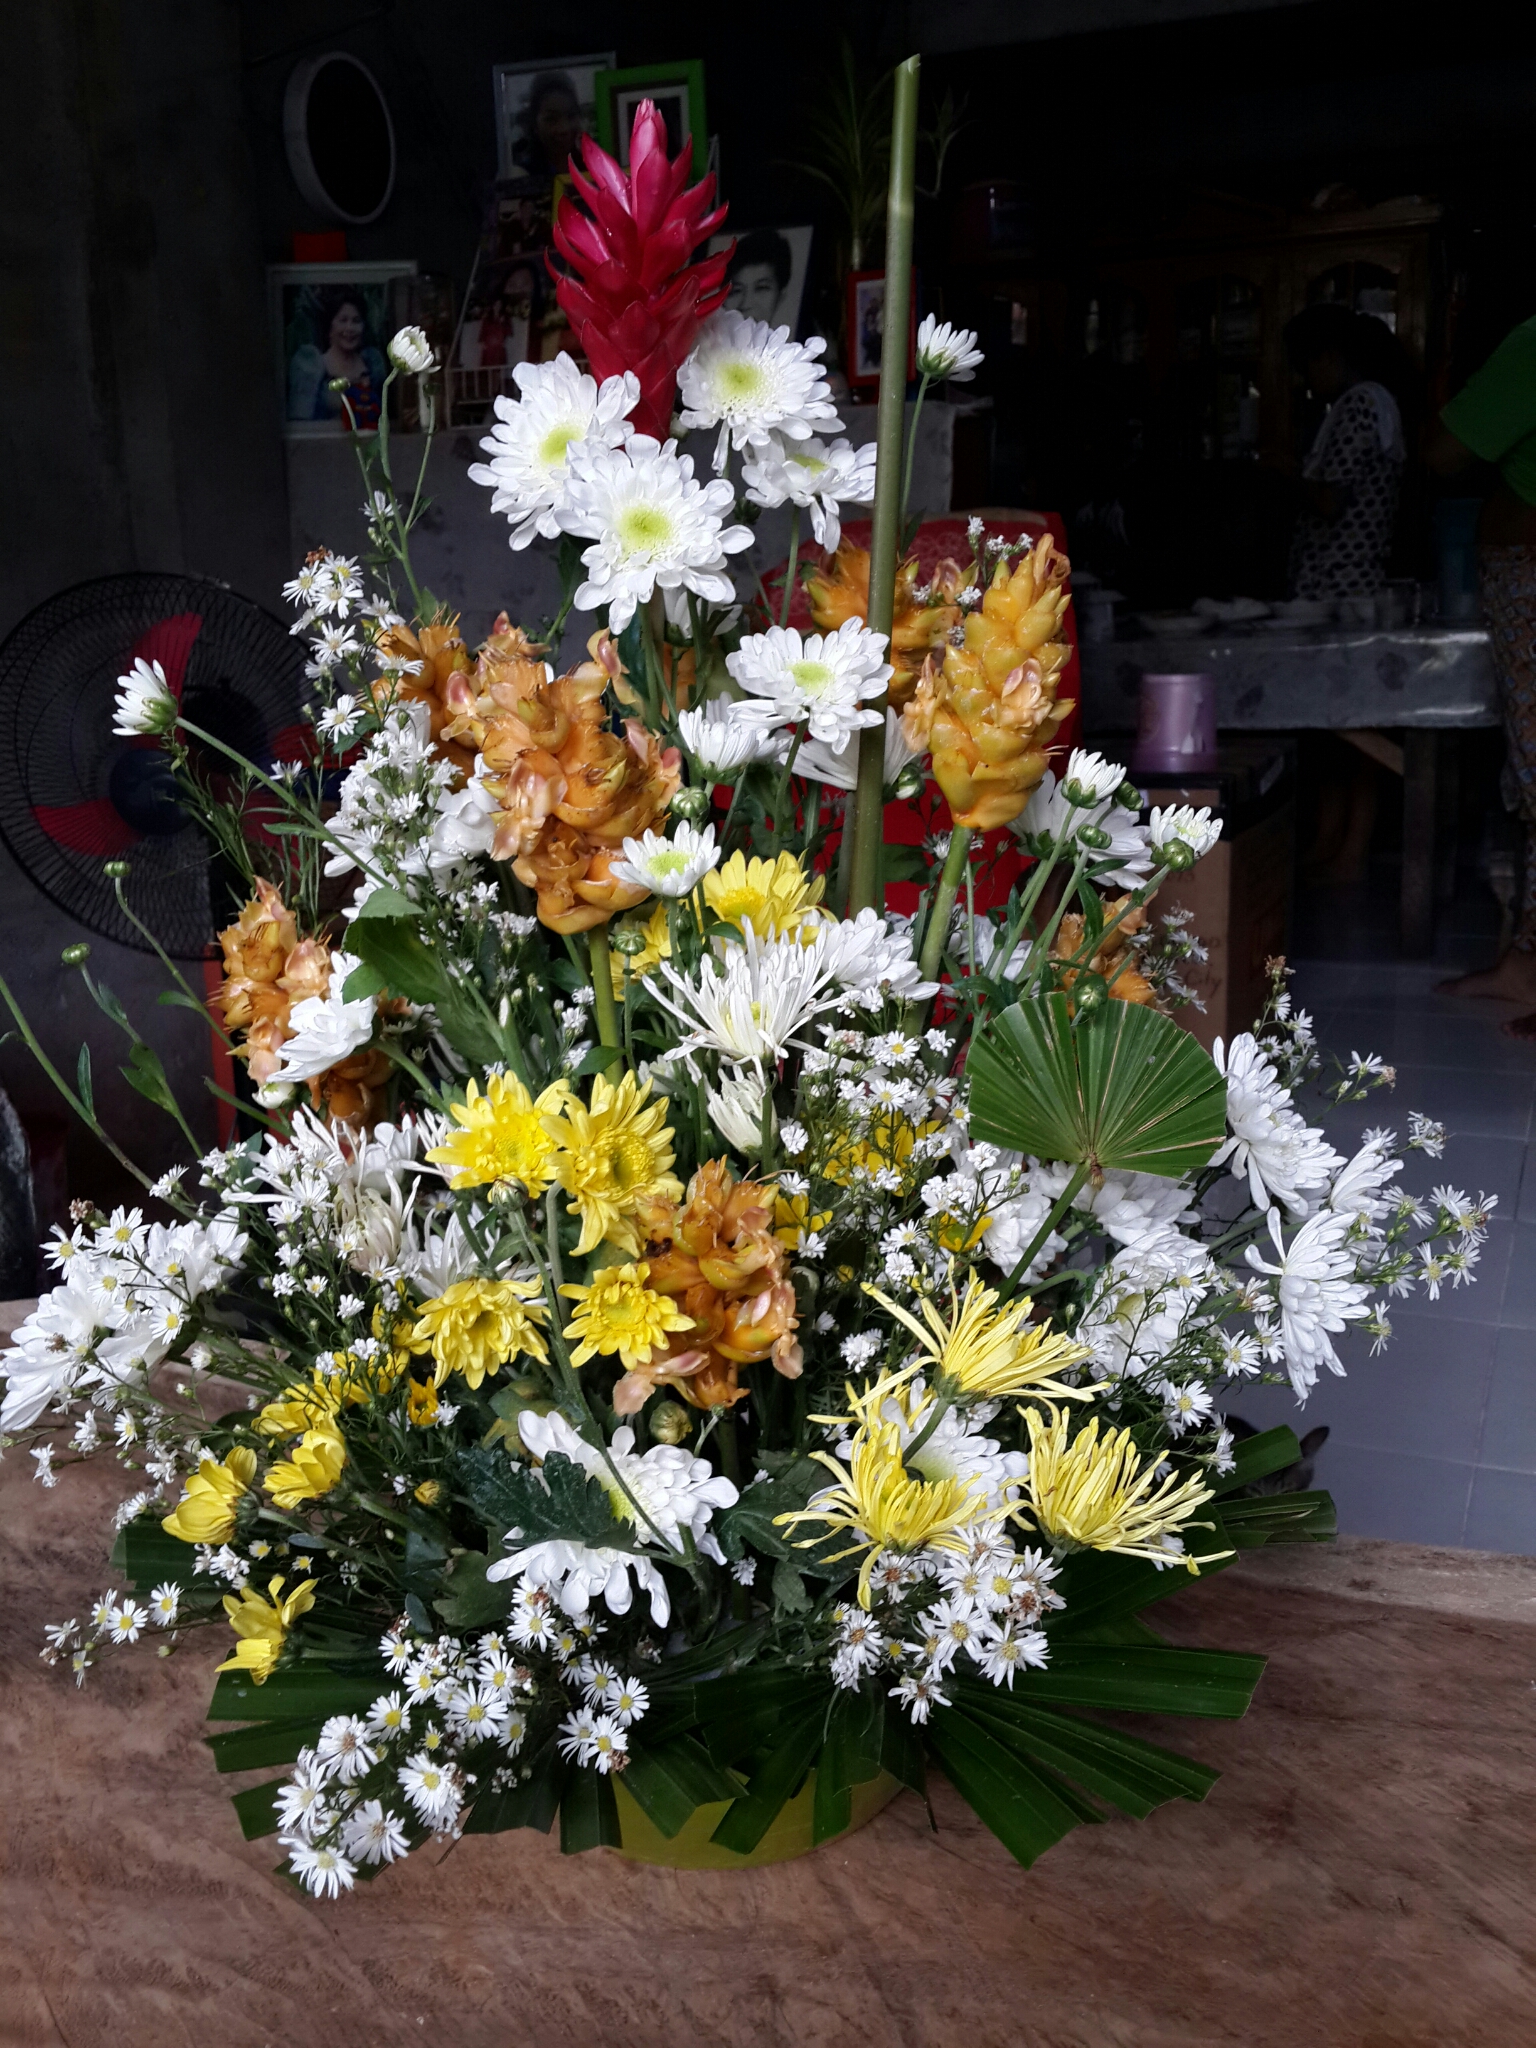 Image is mine. It is my dearly beloved&#039;s floral arrangement for our late Mama Virgie.